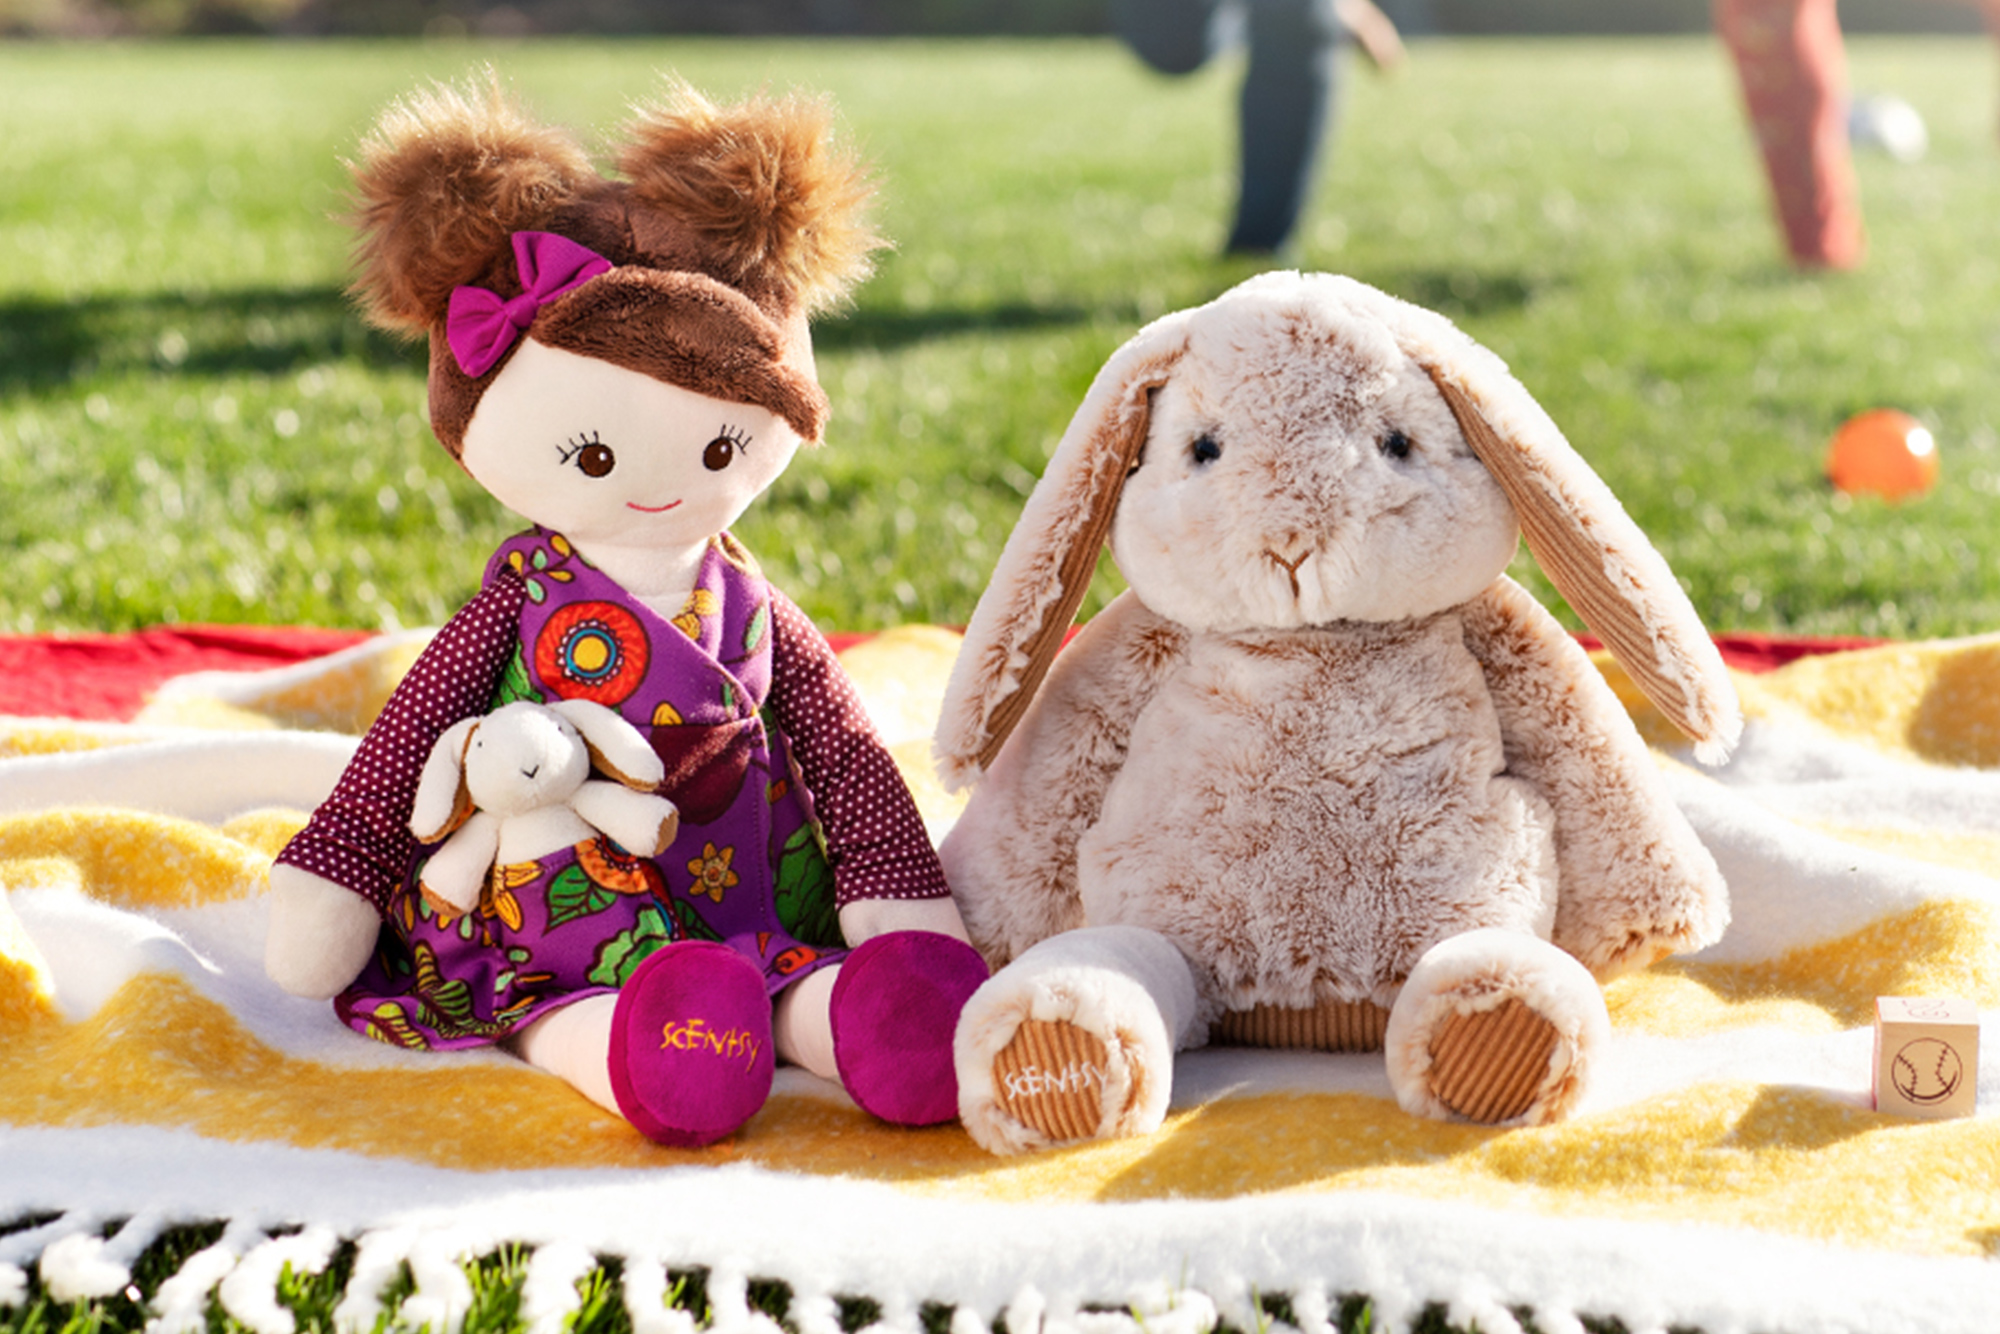 Scentsy Buddies on a blanket outside with people playing in the background